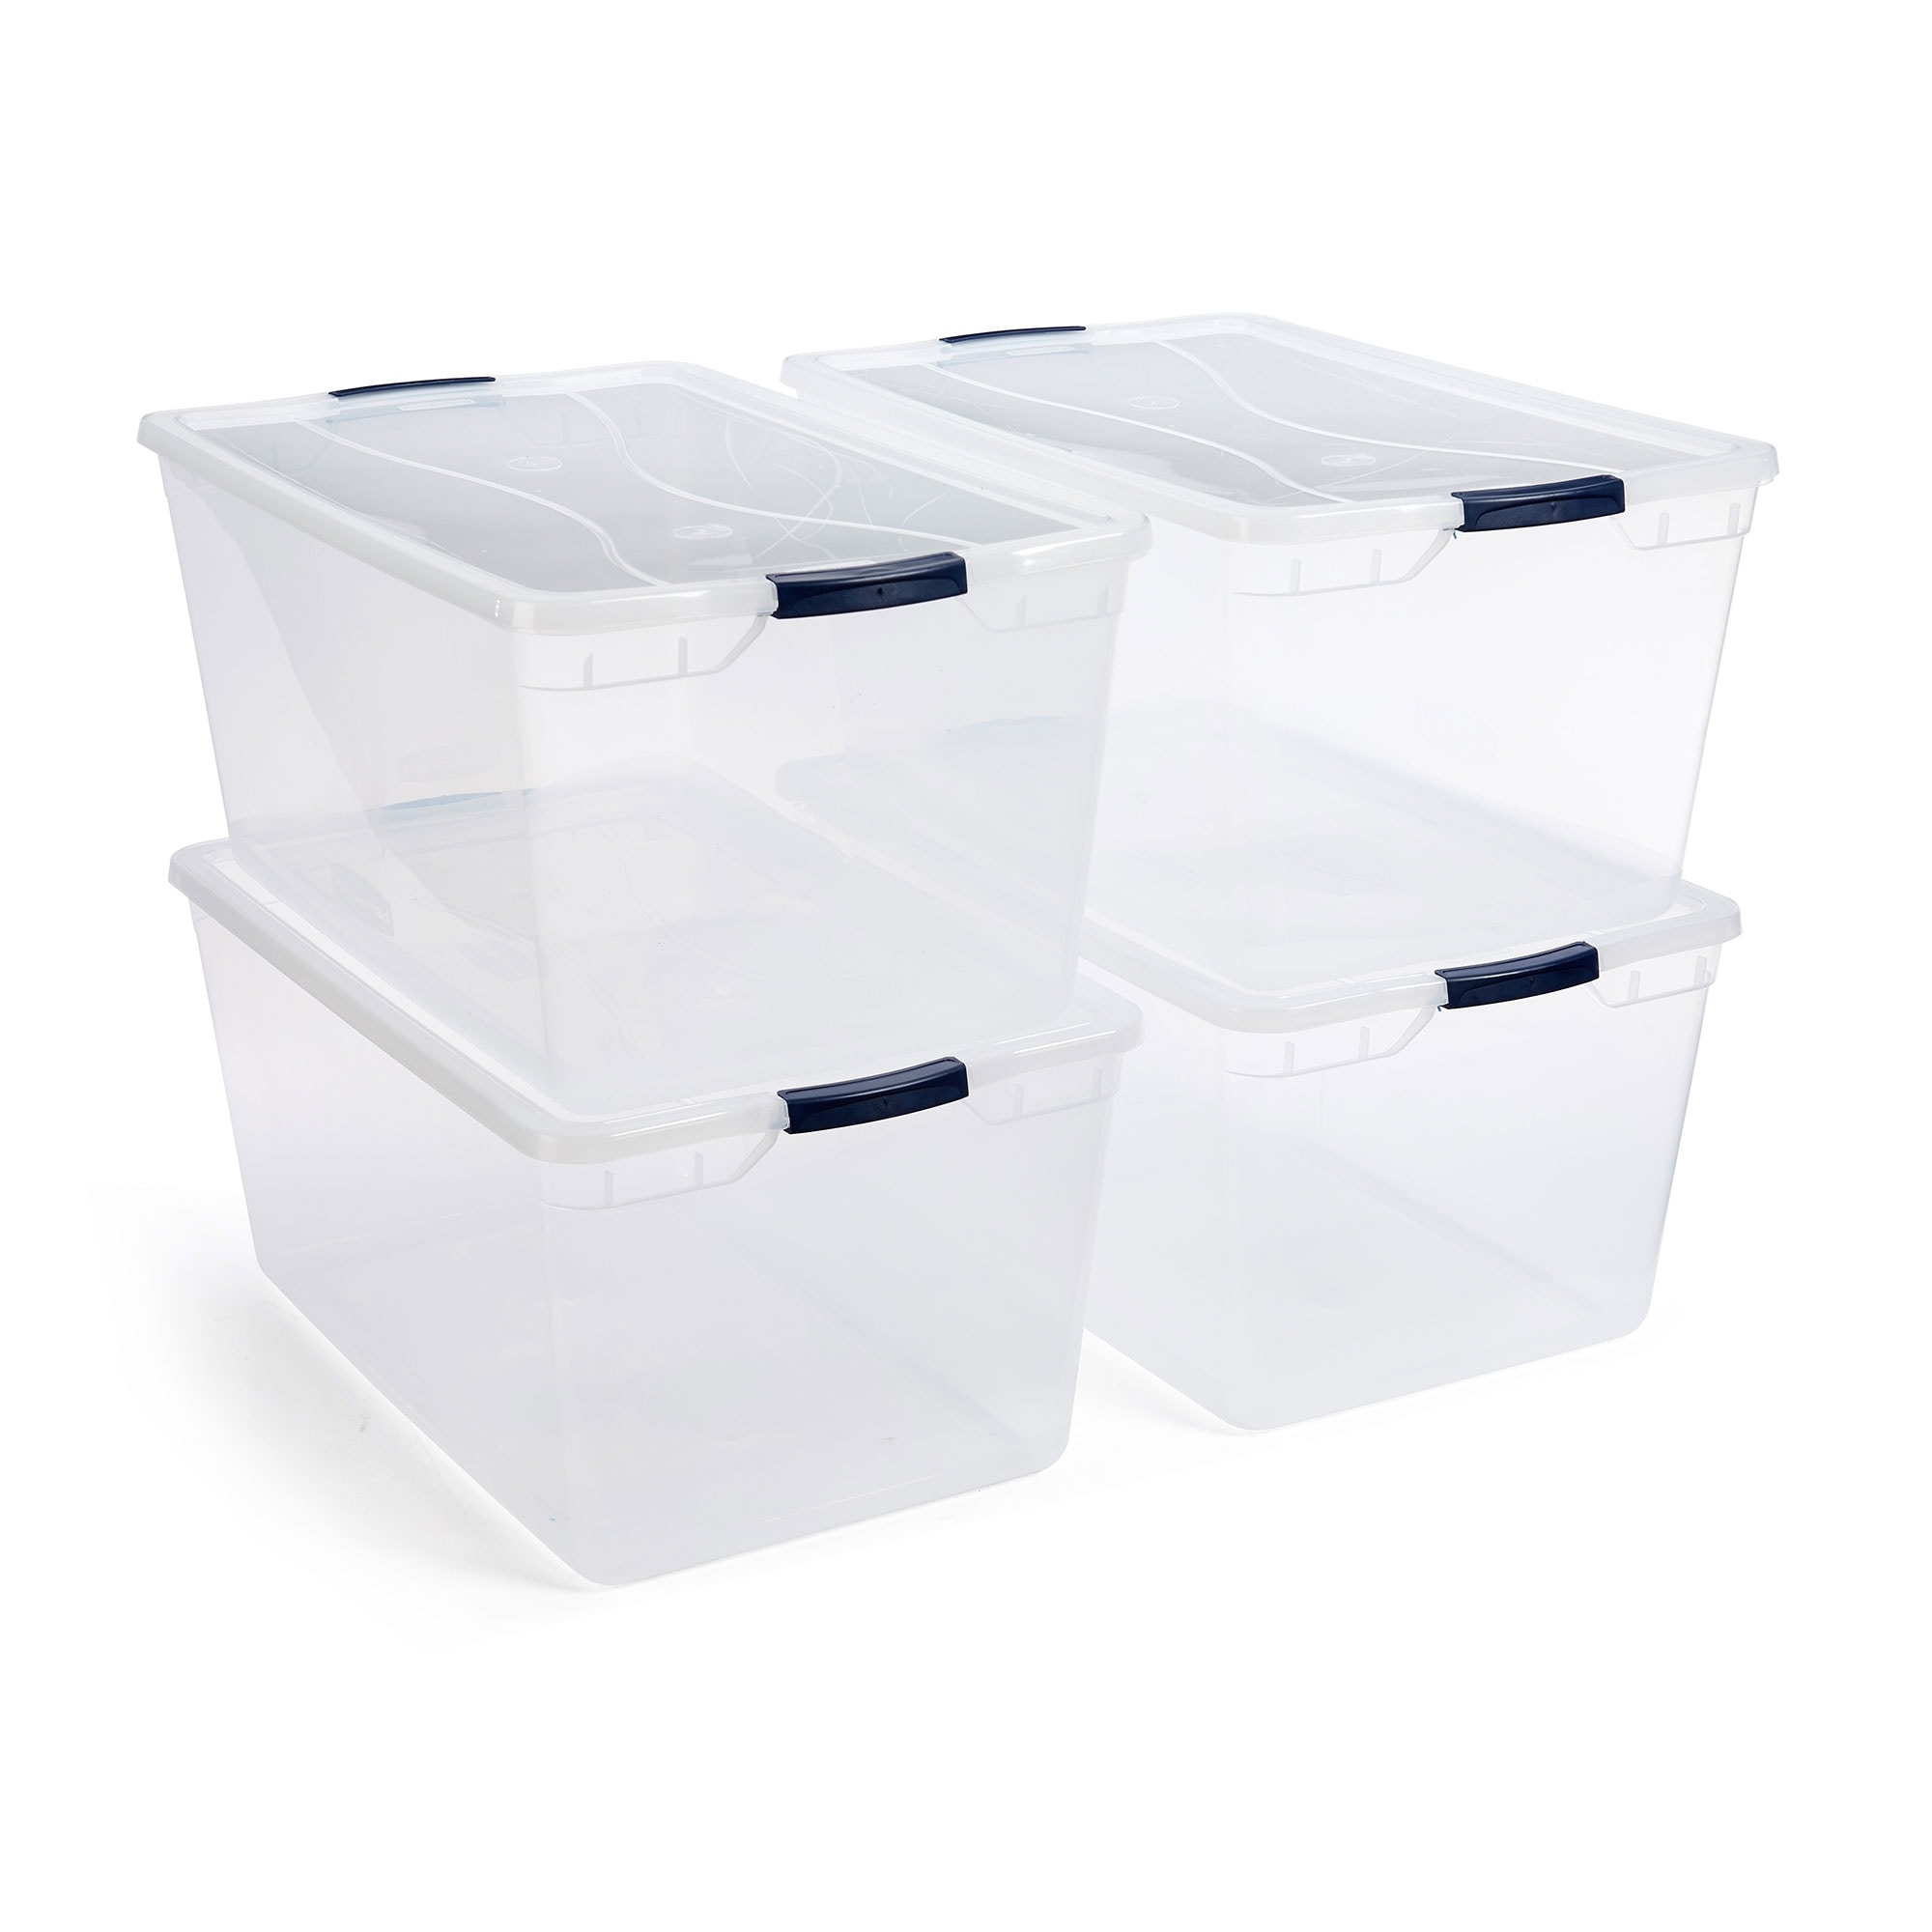 https://ak1.ostkcdn.com/images/products/is/images/direct/cd6524f594f398c2368cae2e8c9ed91dfe74f787/Rubbermaid-Cleverstore-95-Quart-Clear-Plastic-Storage-Container-%26-Lid%2C-%284-Pack%29.jpg